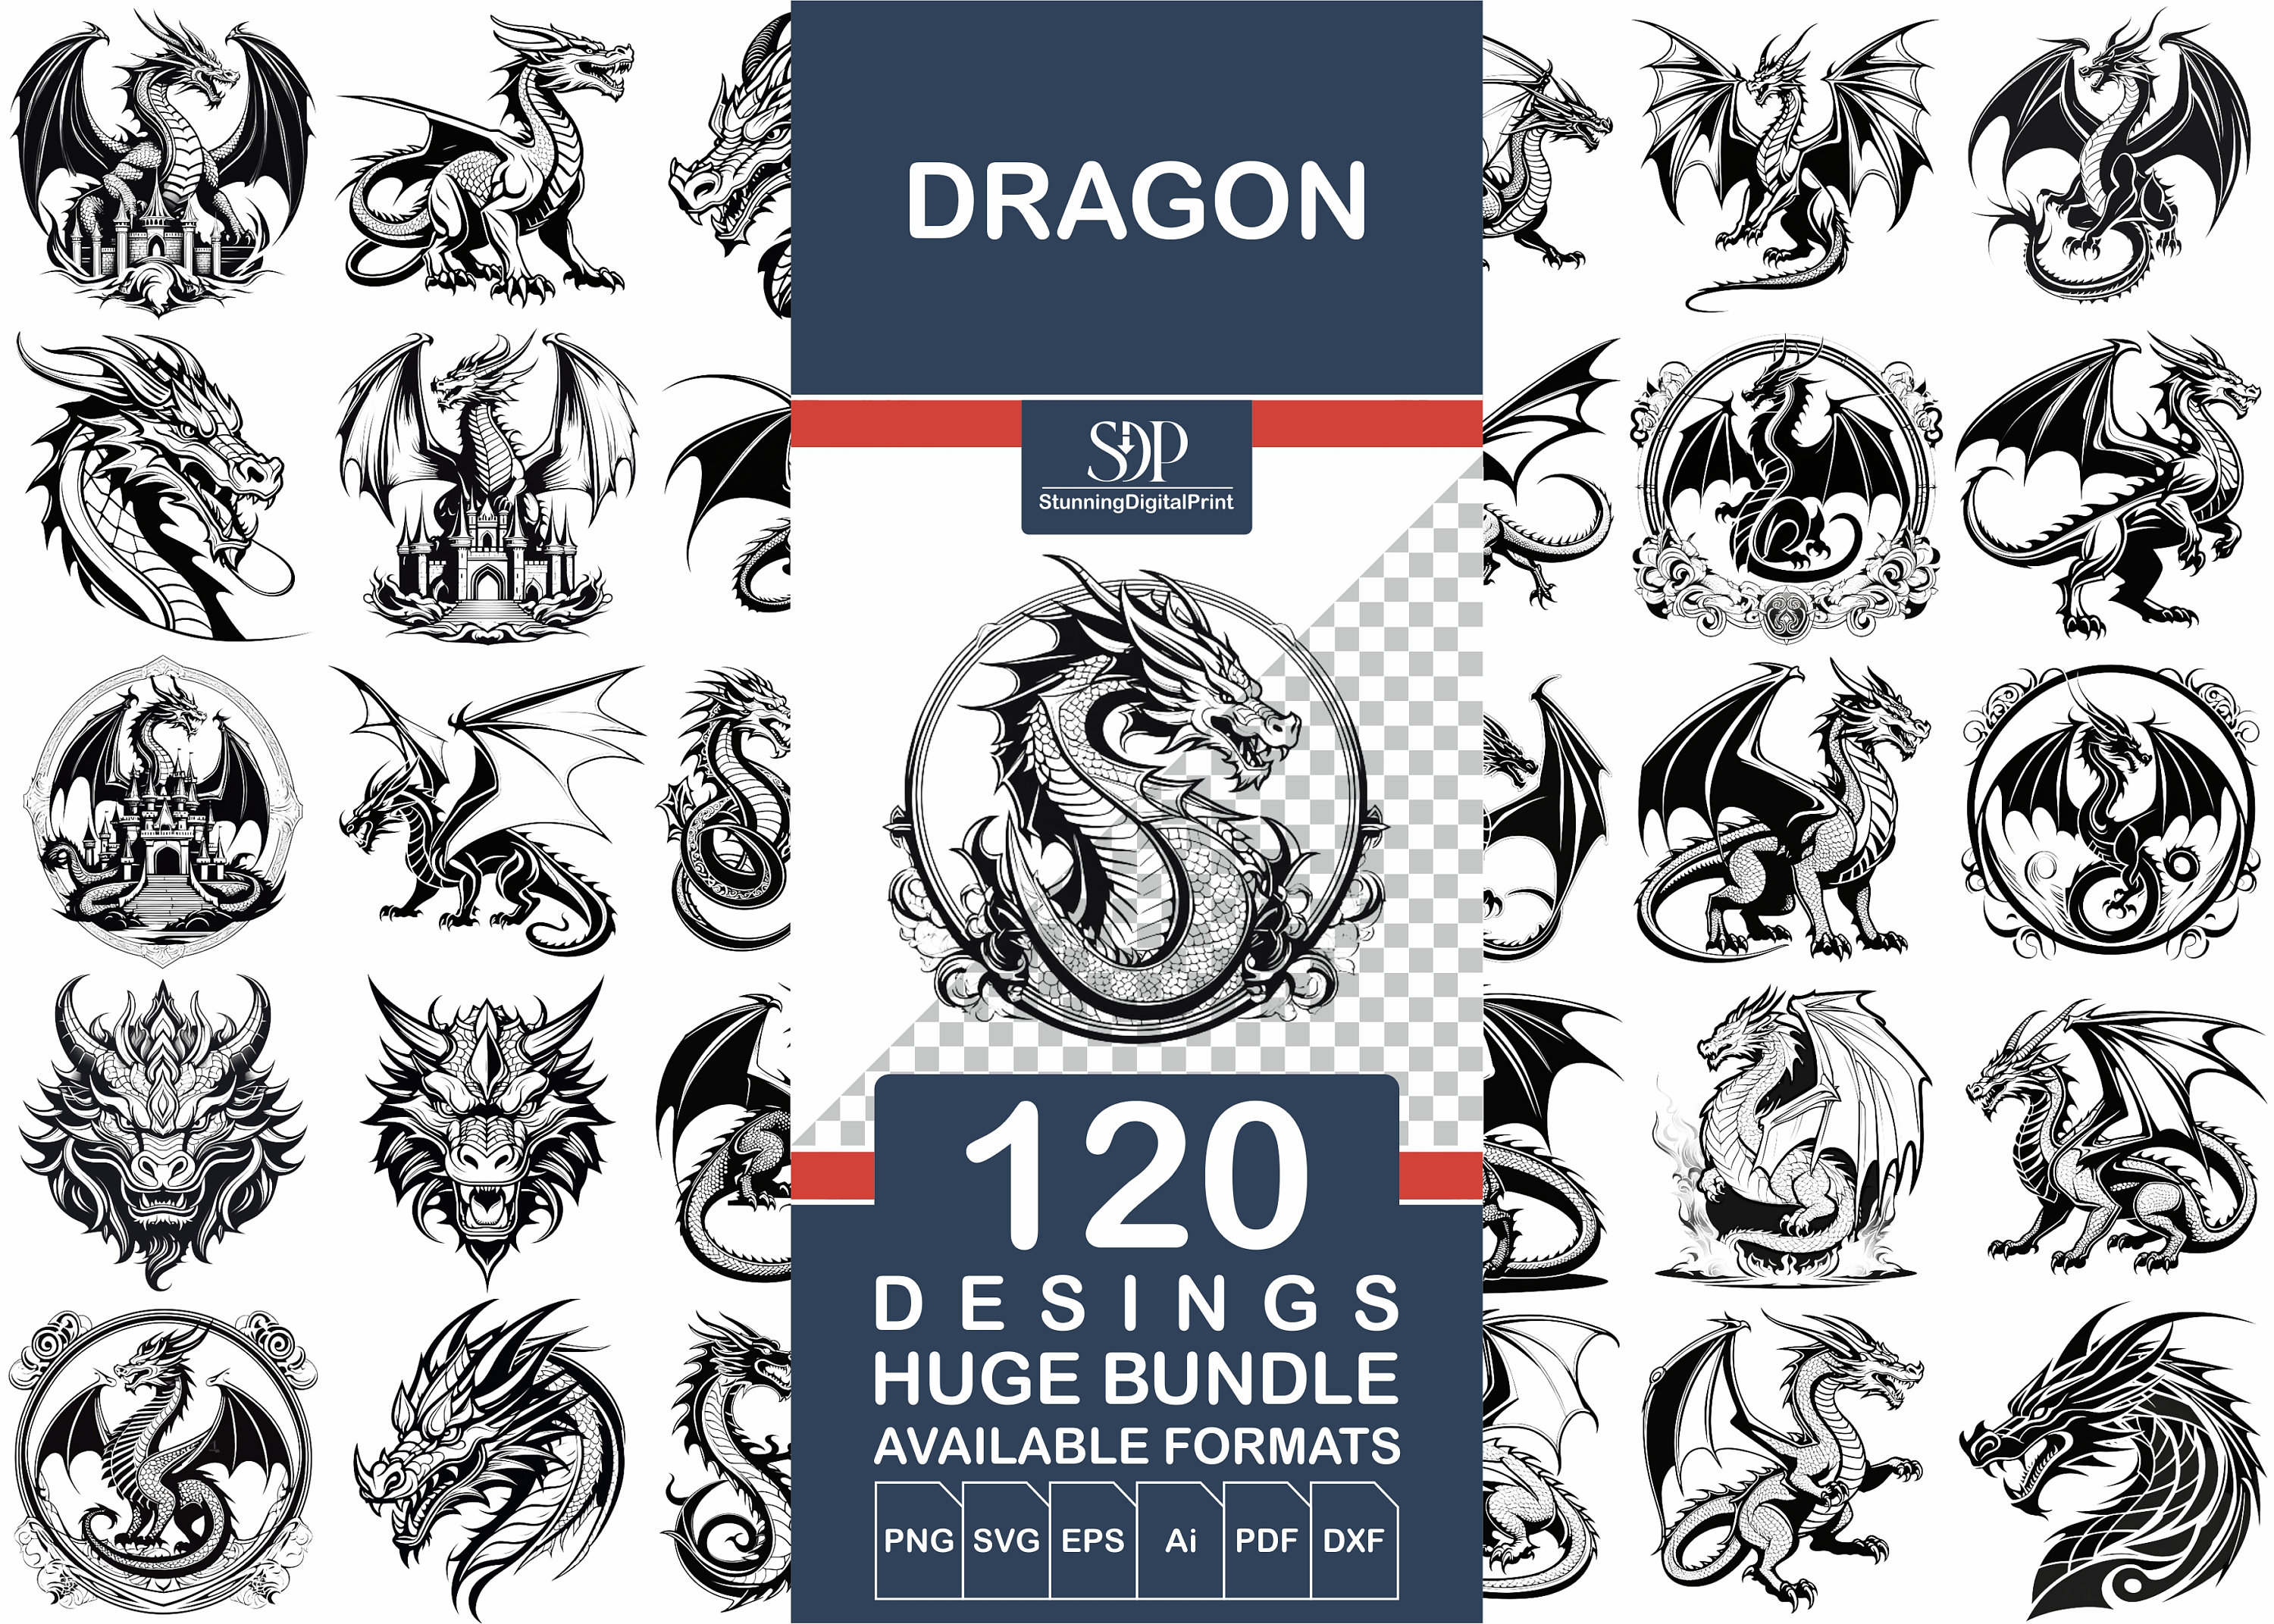  ZAKHSE Cardstock Paper, 24 Sheets A5 Size Scrapbook Paper Pad,  Mascot Dragon Pattern Paper Packs Single-Sided Card Stock, 8 Designs,  Decorative Craft Paper DIY Photo Album Card Making Supplies 